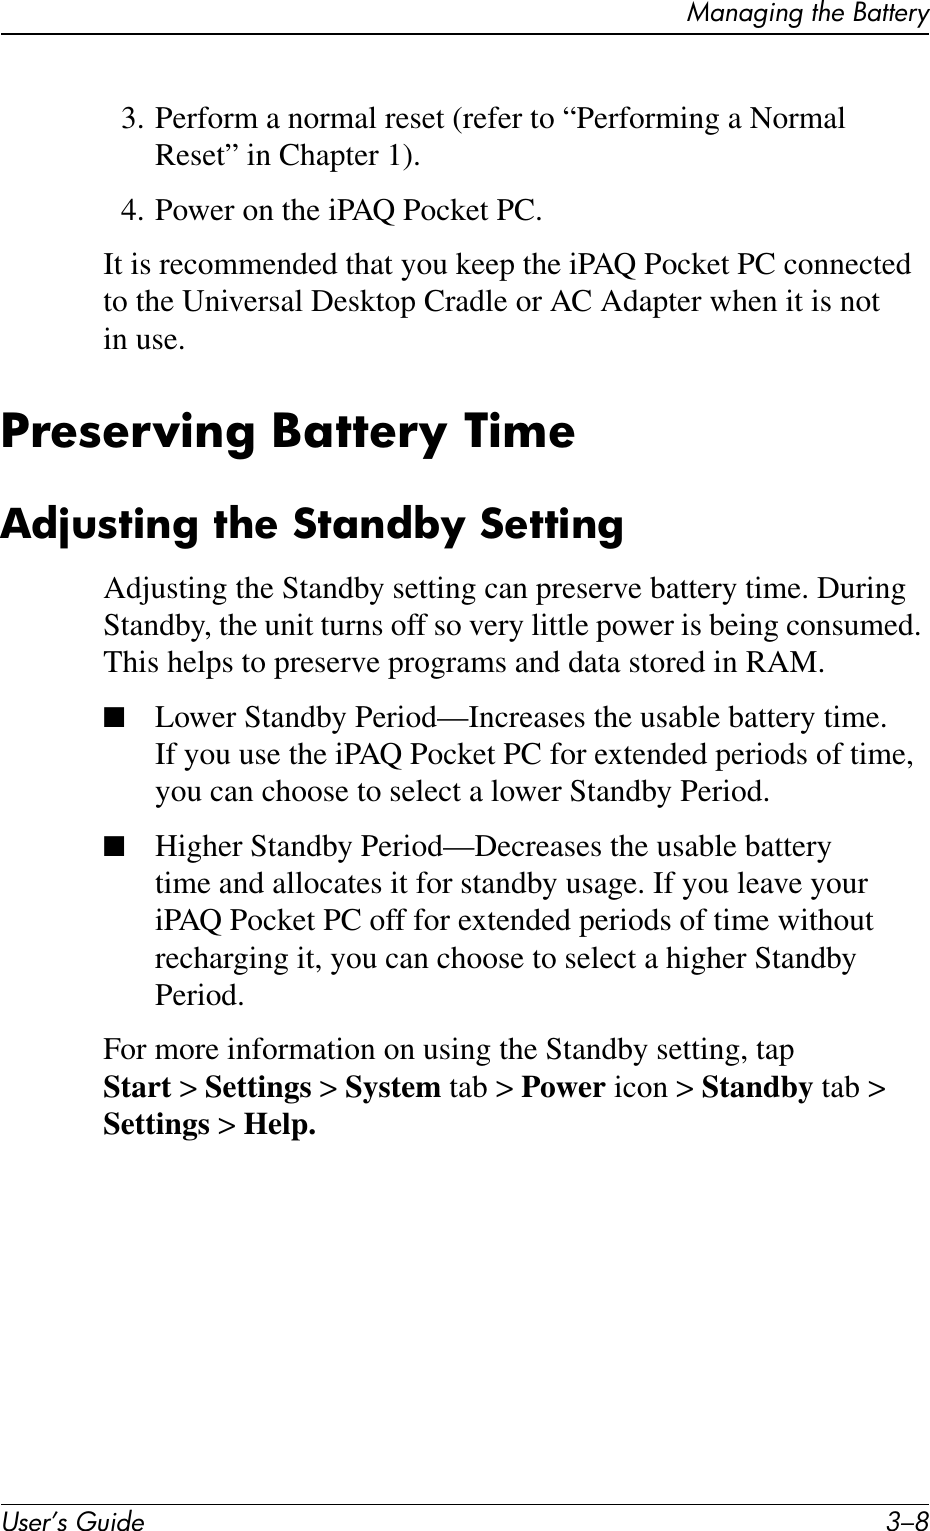 User’s Guide 3–8Managing the Battery3. Perform a normal reset (refer to “Performing a Normal Reset” in Chapter 1).4. Power on the iPAQ Pocket PC.It is recommended that you keep the iPAQ Pocket PC connected to the Universal Desktop Cradle or AC Adapter when it is not in use.Preserving Battery TimeAdjusting the Standby SettingAdjusting the Standby setting can preserve battery time. During Standby, the unit turns off so very little power is being consumed. This helps to preserve programs and data stored in RAM.■Lower Standby Period—Increases the usable battery time. If you use the iPAQ Pocket PC for extended periods of time, you can choose to select a lower Standby Period.■Higher Standby Period—Decreases the usable battery time and allocates it for standby usage. If you leave your iPAQ Pocket PC off for extended periods of time without recharging it, you can choose to select a higher Standby Period.For more information on using the Standby setting, tap Start &gt;Settings &gt; System tab &gt; Power icon &gt; Standby tab &gt; Settings &gt; Help.